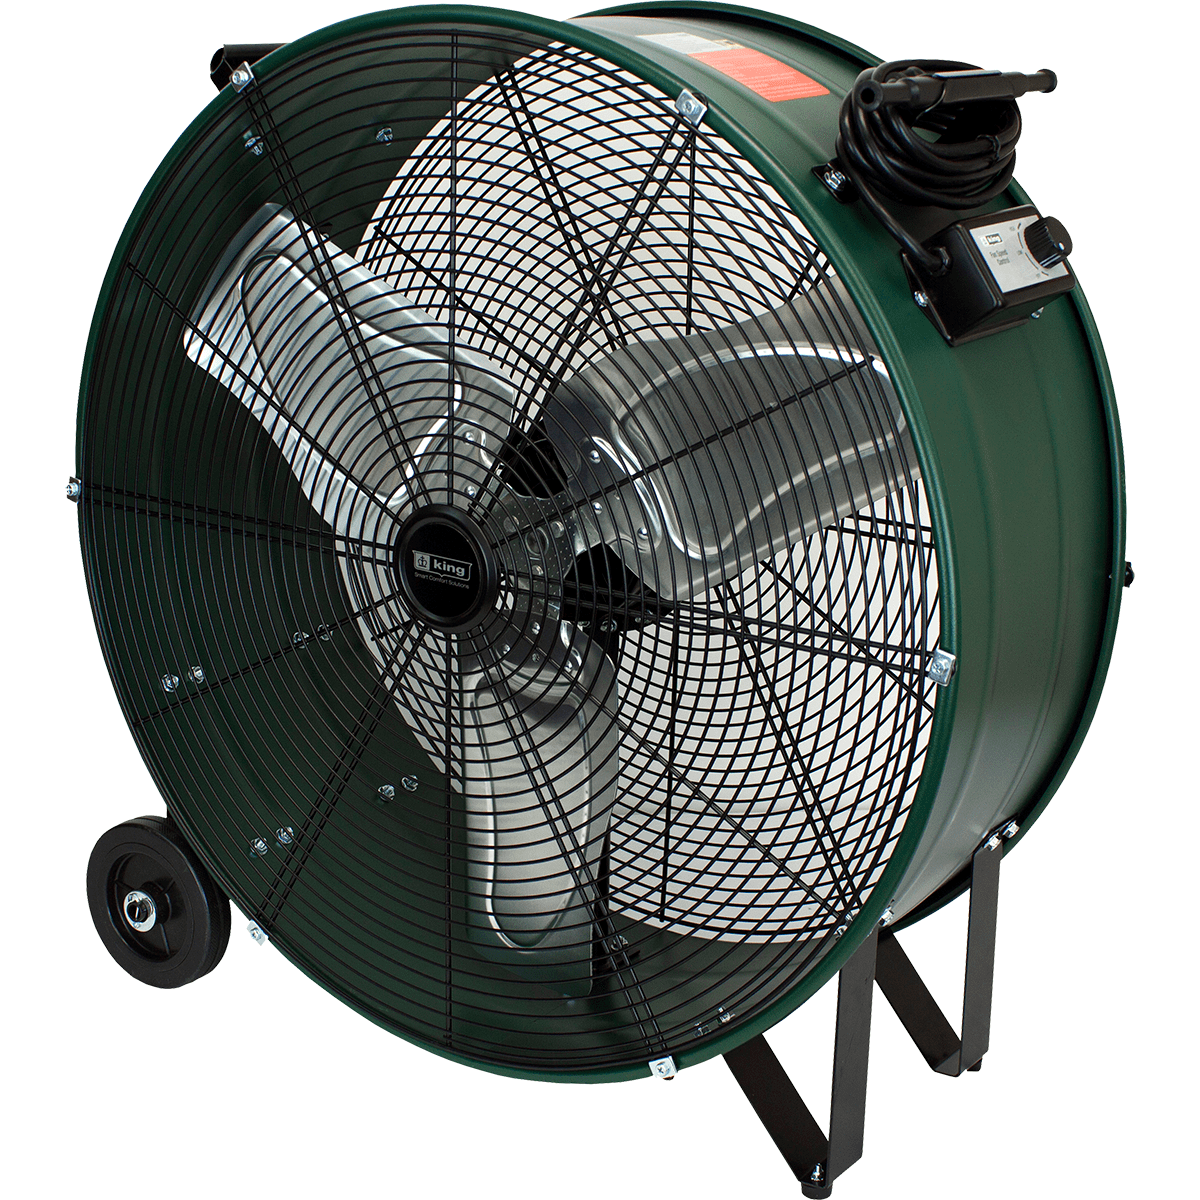 King Electric 36-in. Direct Drive Fixed Drum Fan